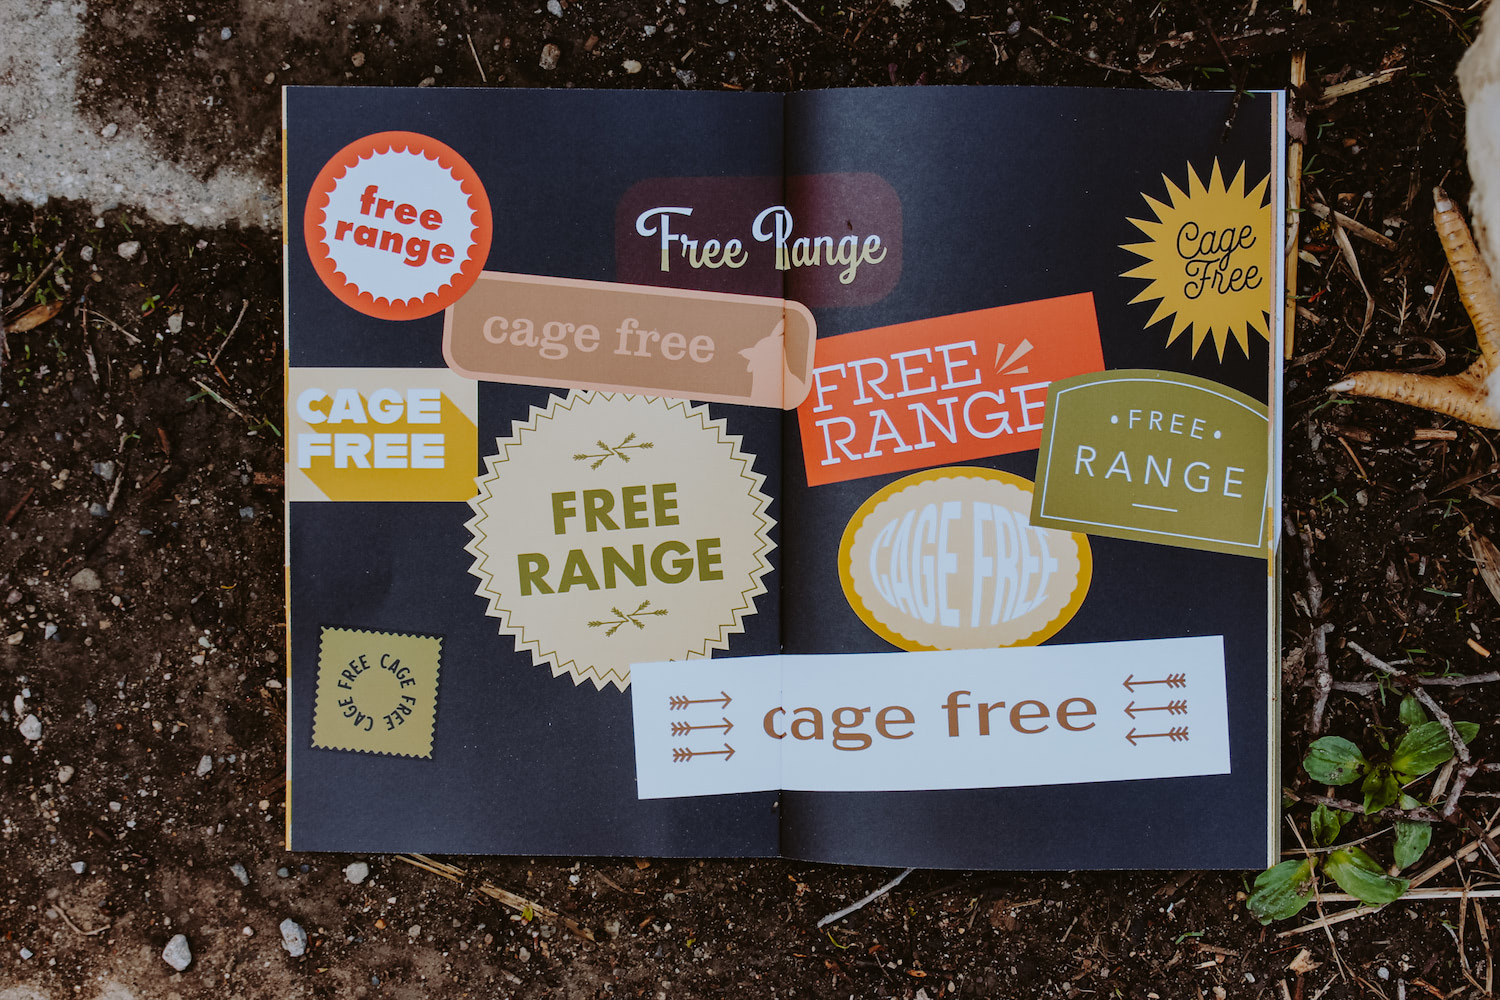 Book spread open to a page with free range and cage free stickers, next to a chicken